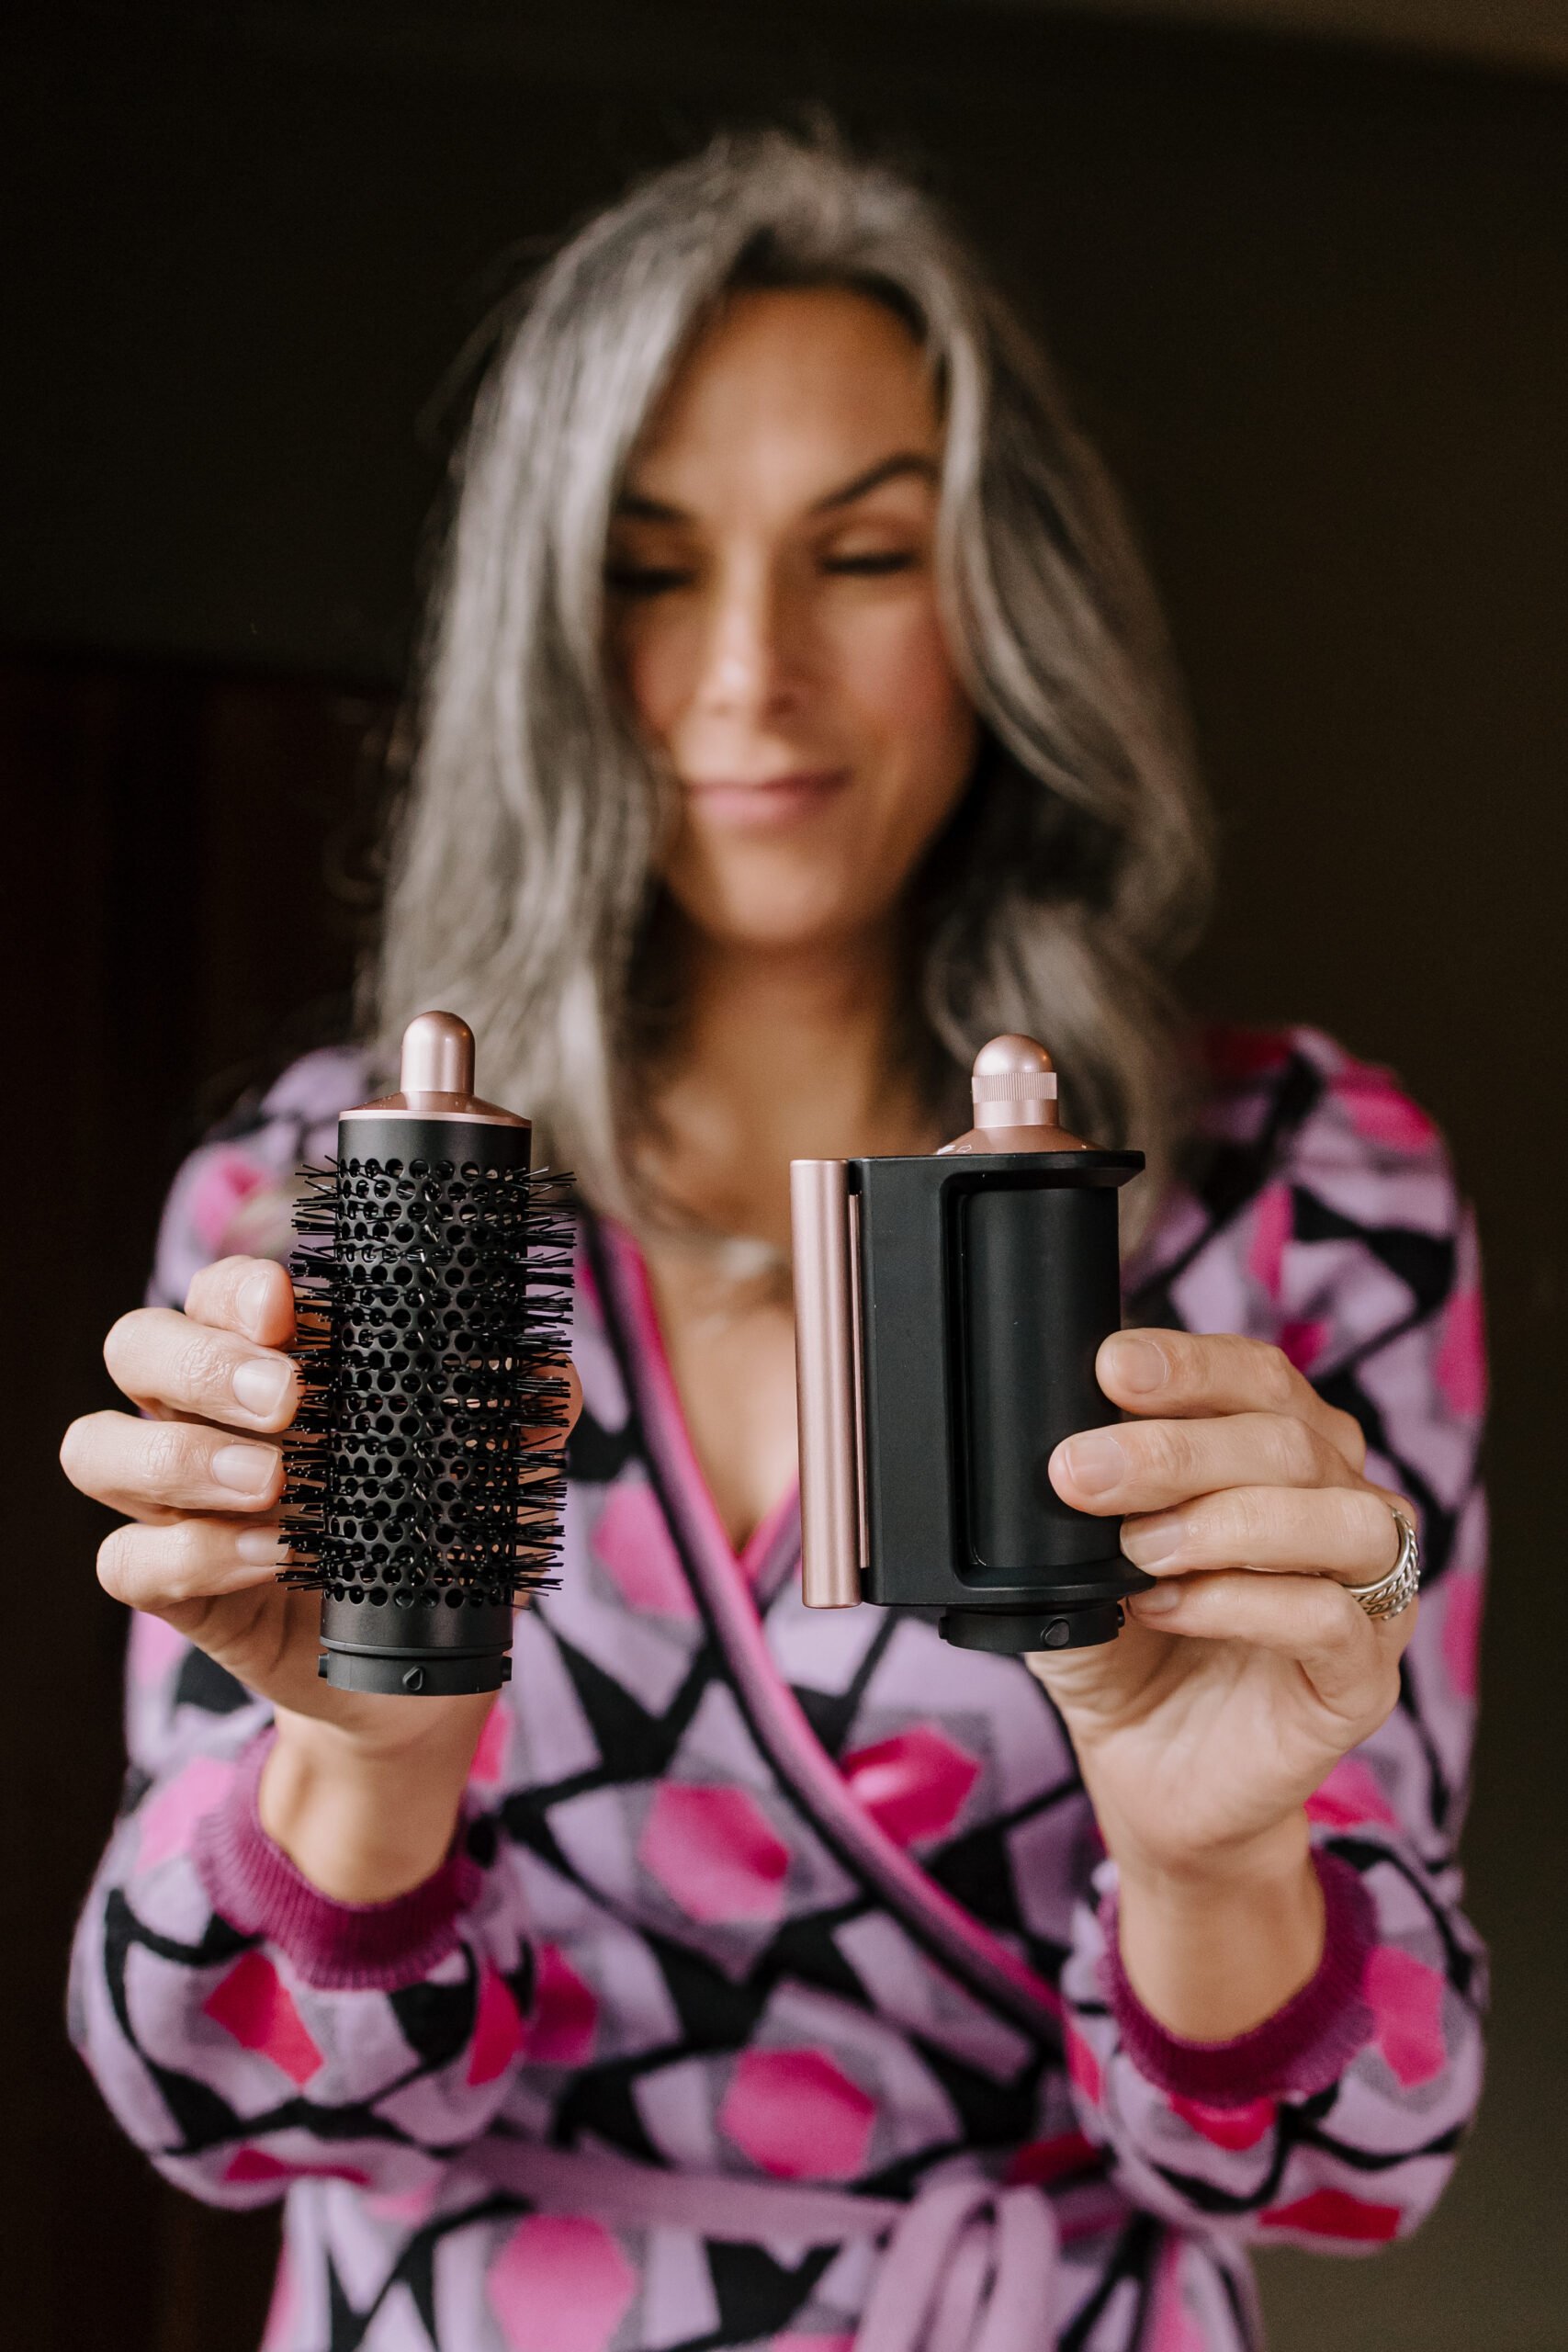 A woman holds up two Dyson Airwrap attachments: The round volumizing brush (left) and the Coanada smoothing dryer (right).